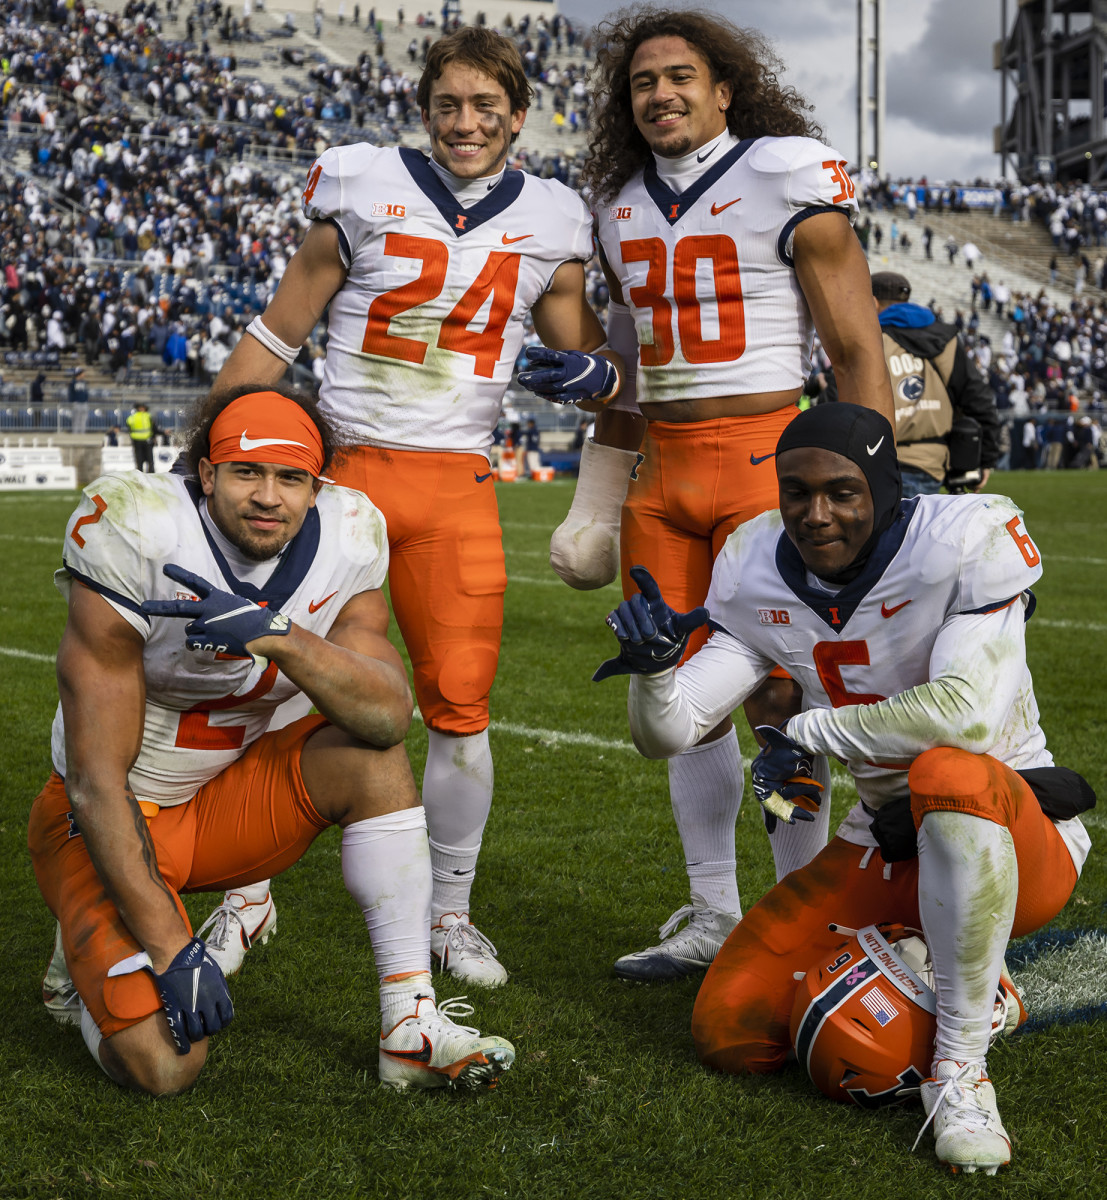 Chase (wearing No. 2) and Sydney (No. 30) with Illinois teammates.